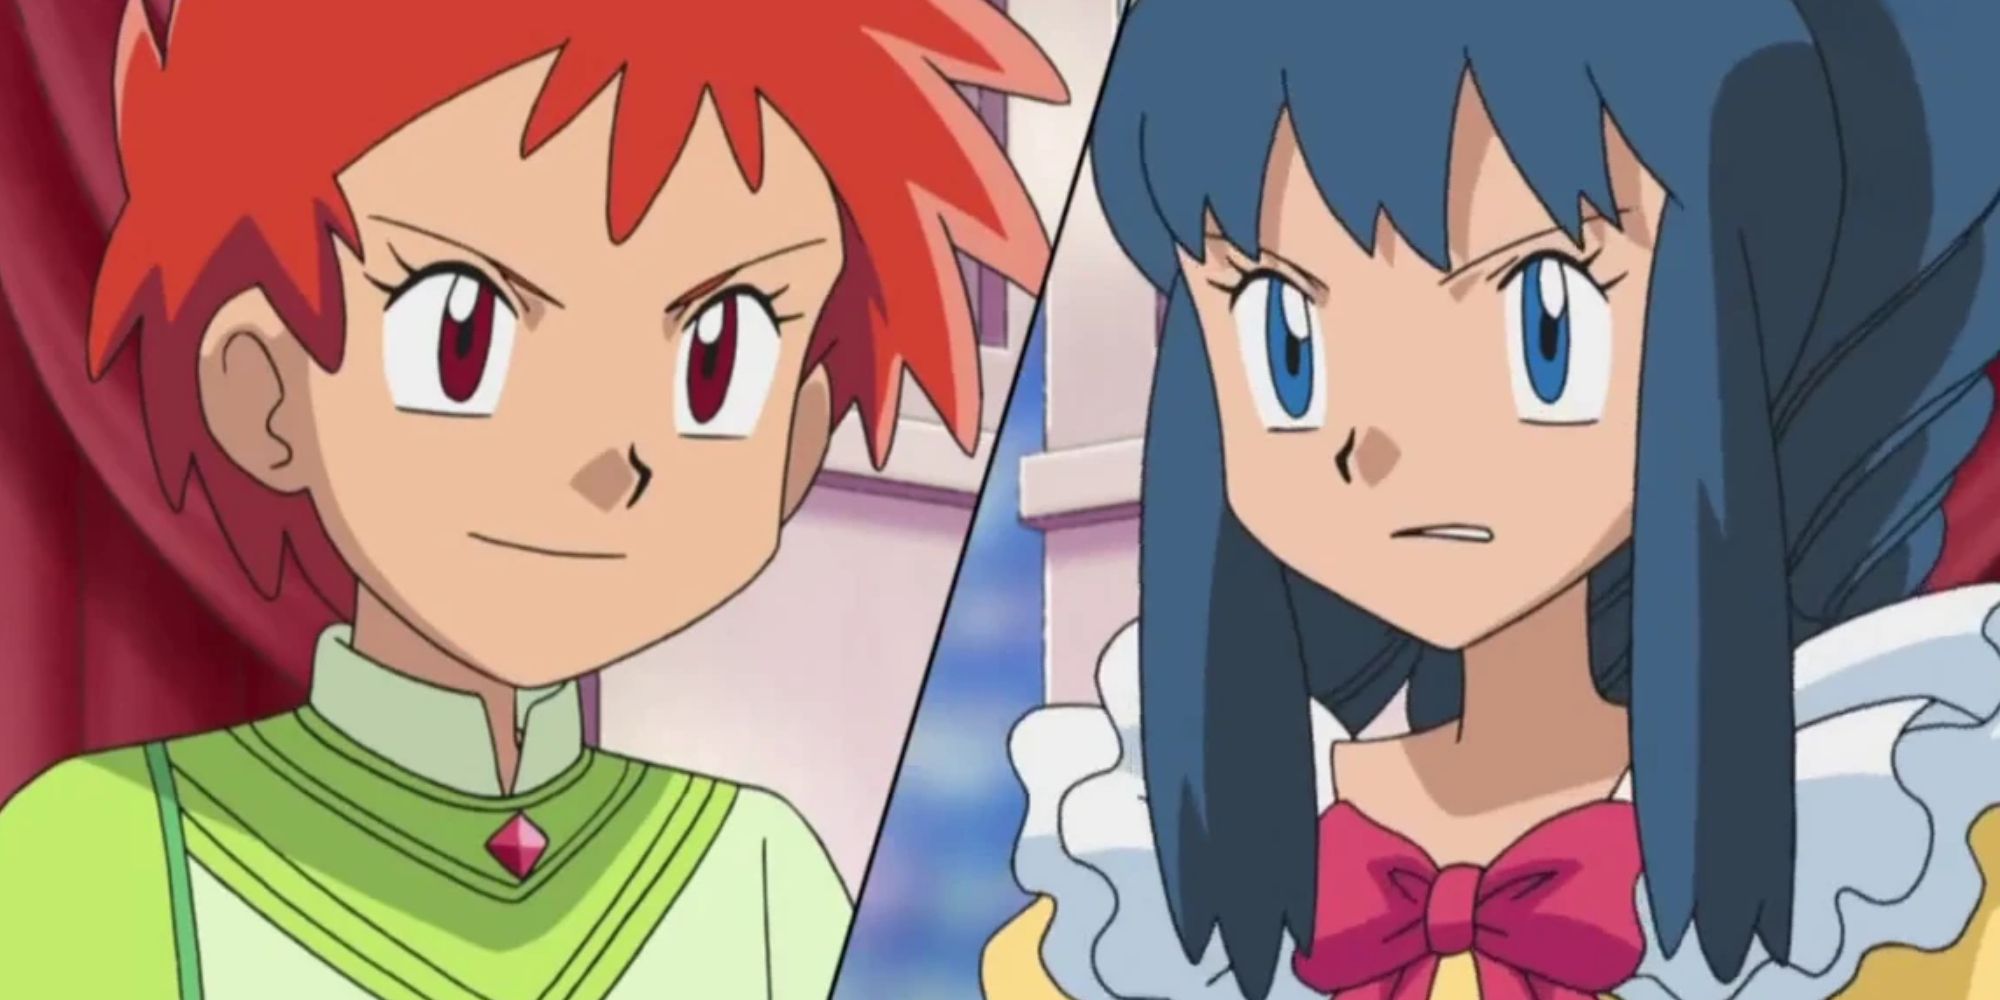 Zoey and Dawn in their final face off against each other at the Sinnoh Grand Festival